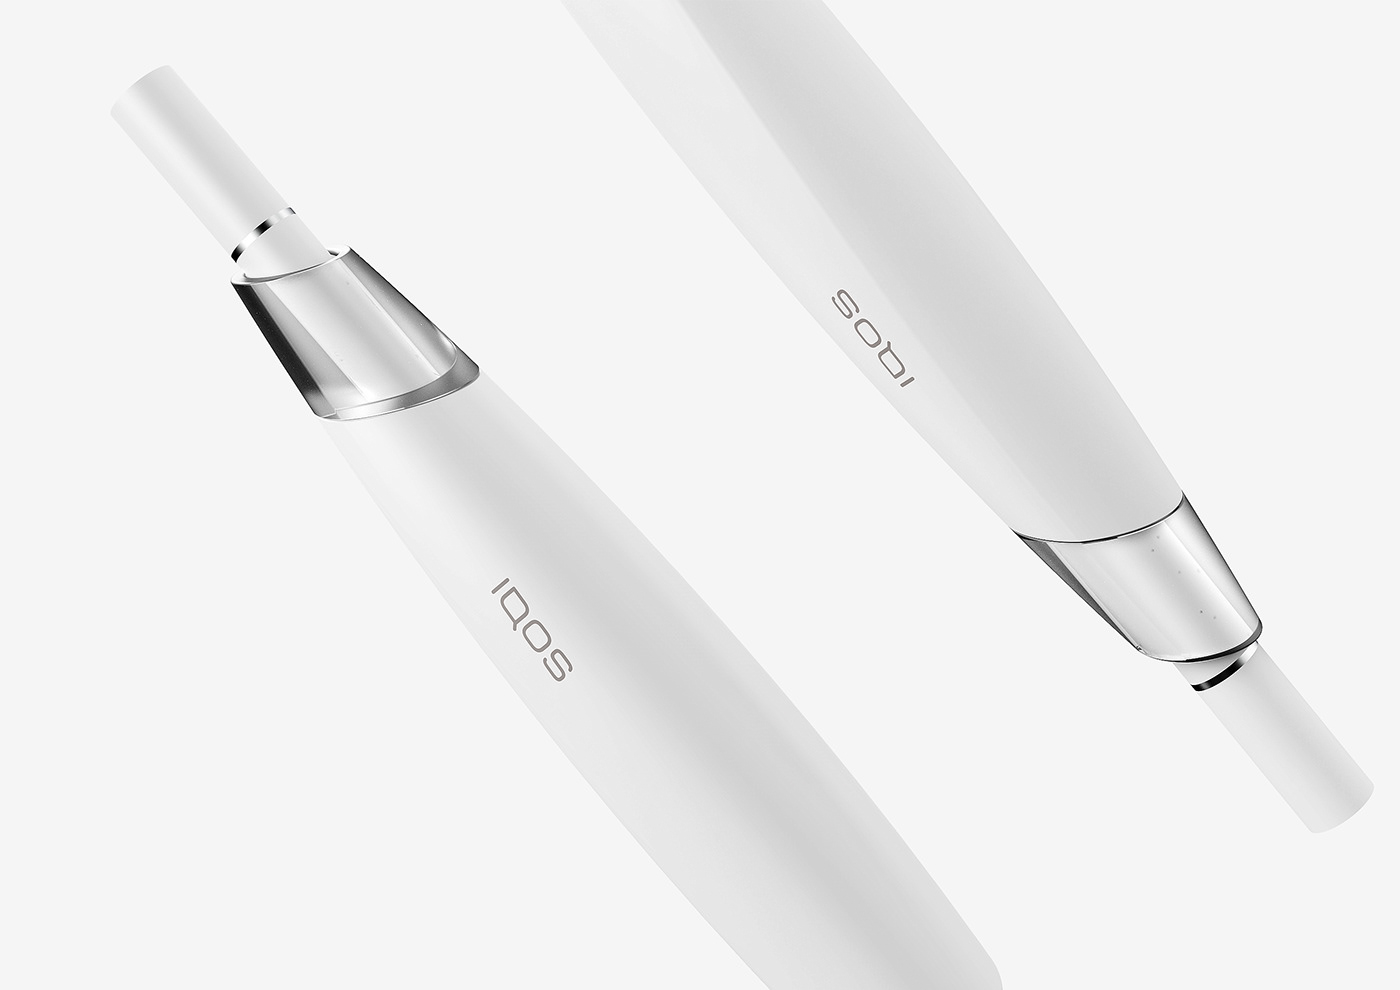 IQOS cigarette design product ecigarette Render industrial smoking wzornictwo heating